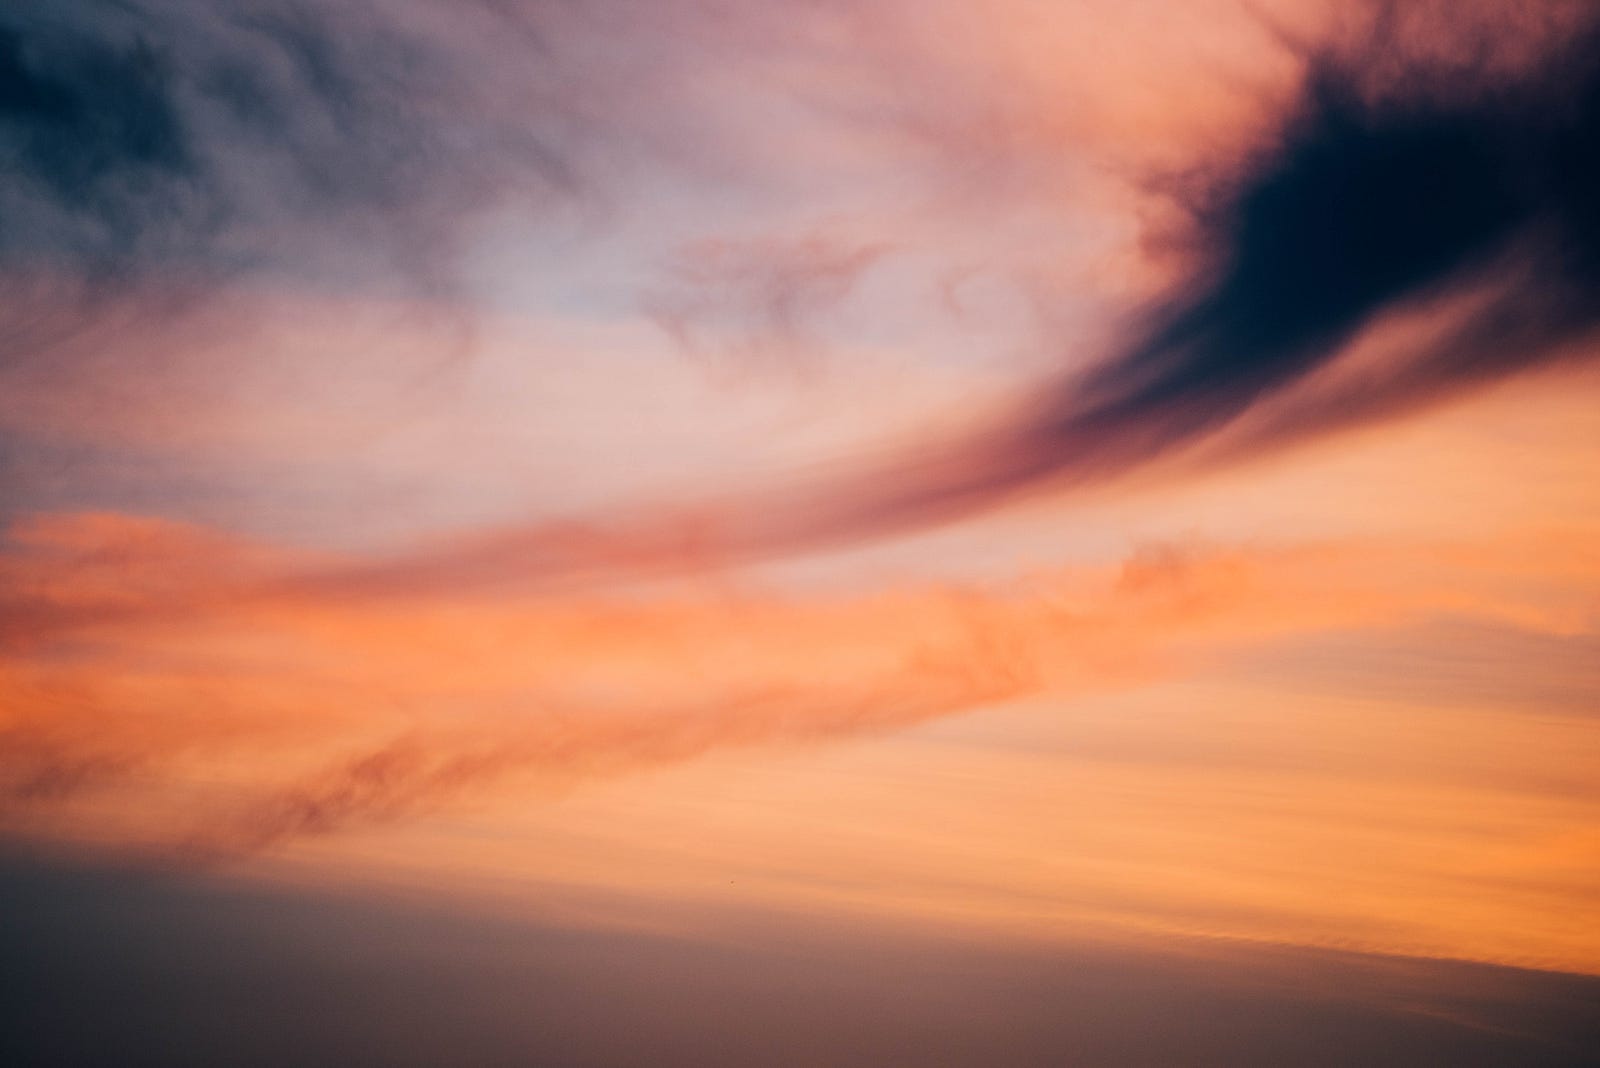 A photo of a surreal sunset, with thin cloud layers cutting diagonally across the image. Chemicals known as free radicals can damage our cells, including our genetic material.